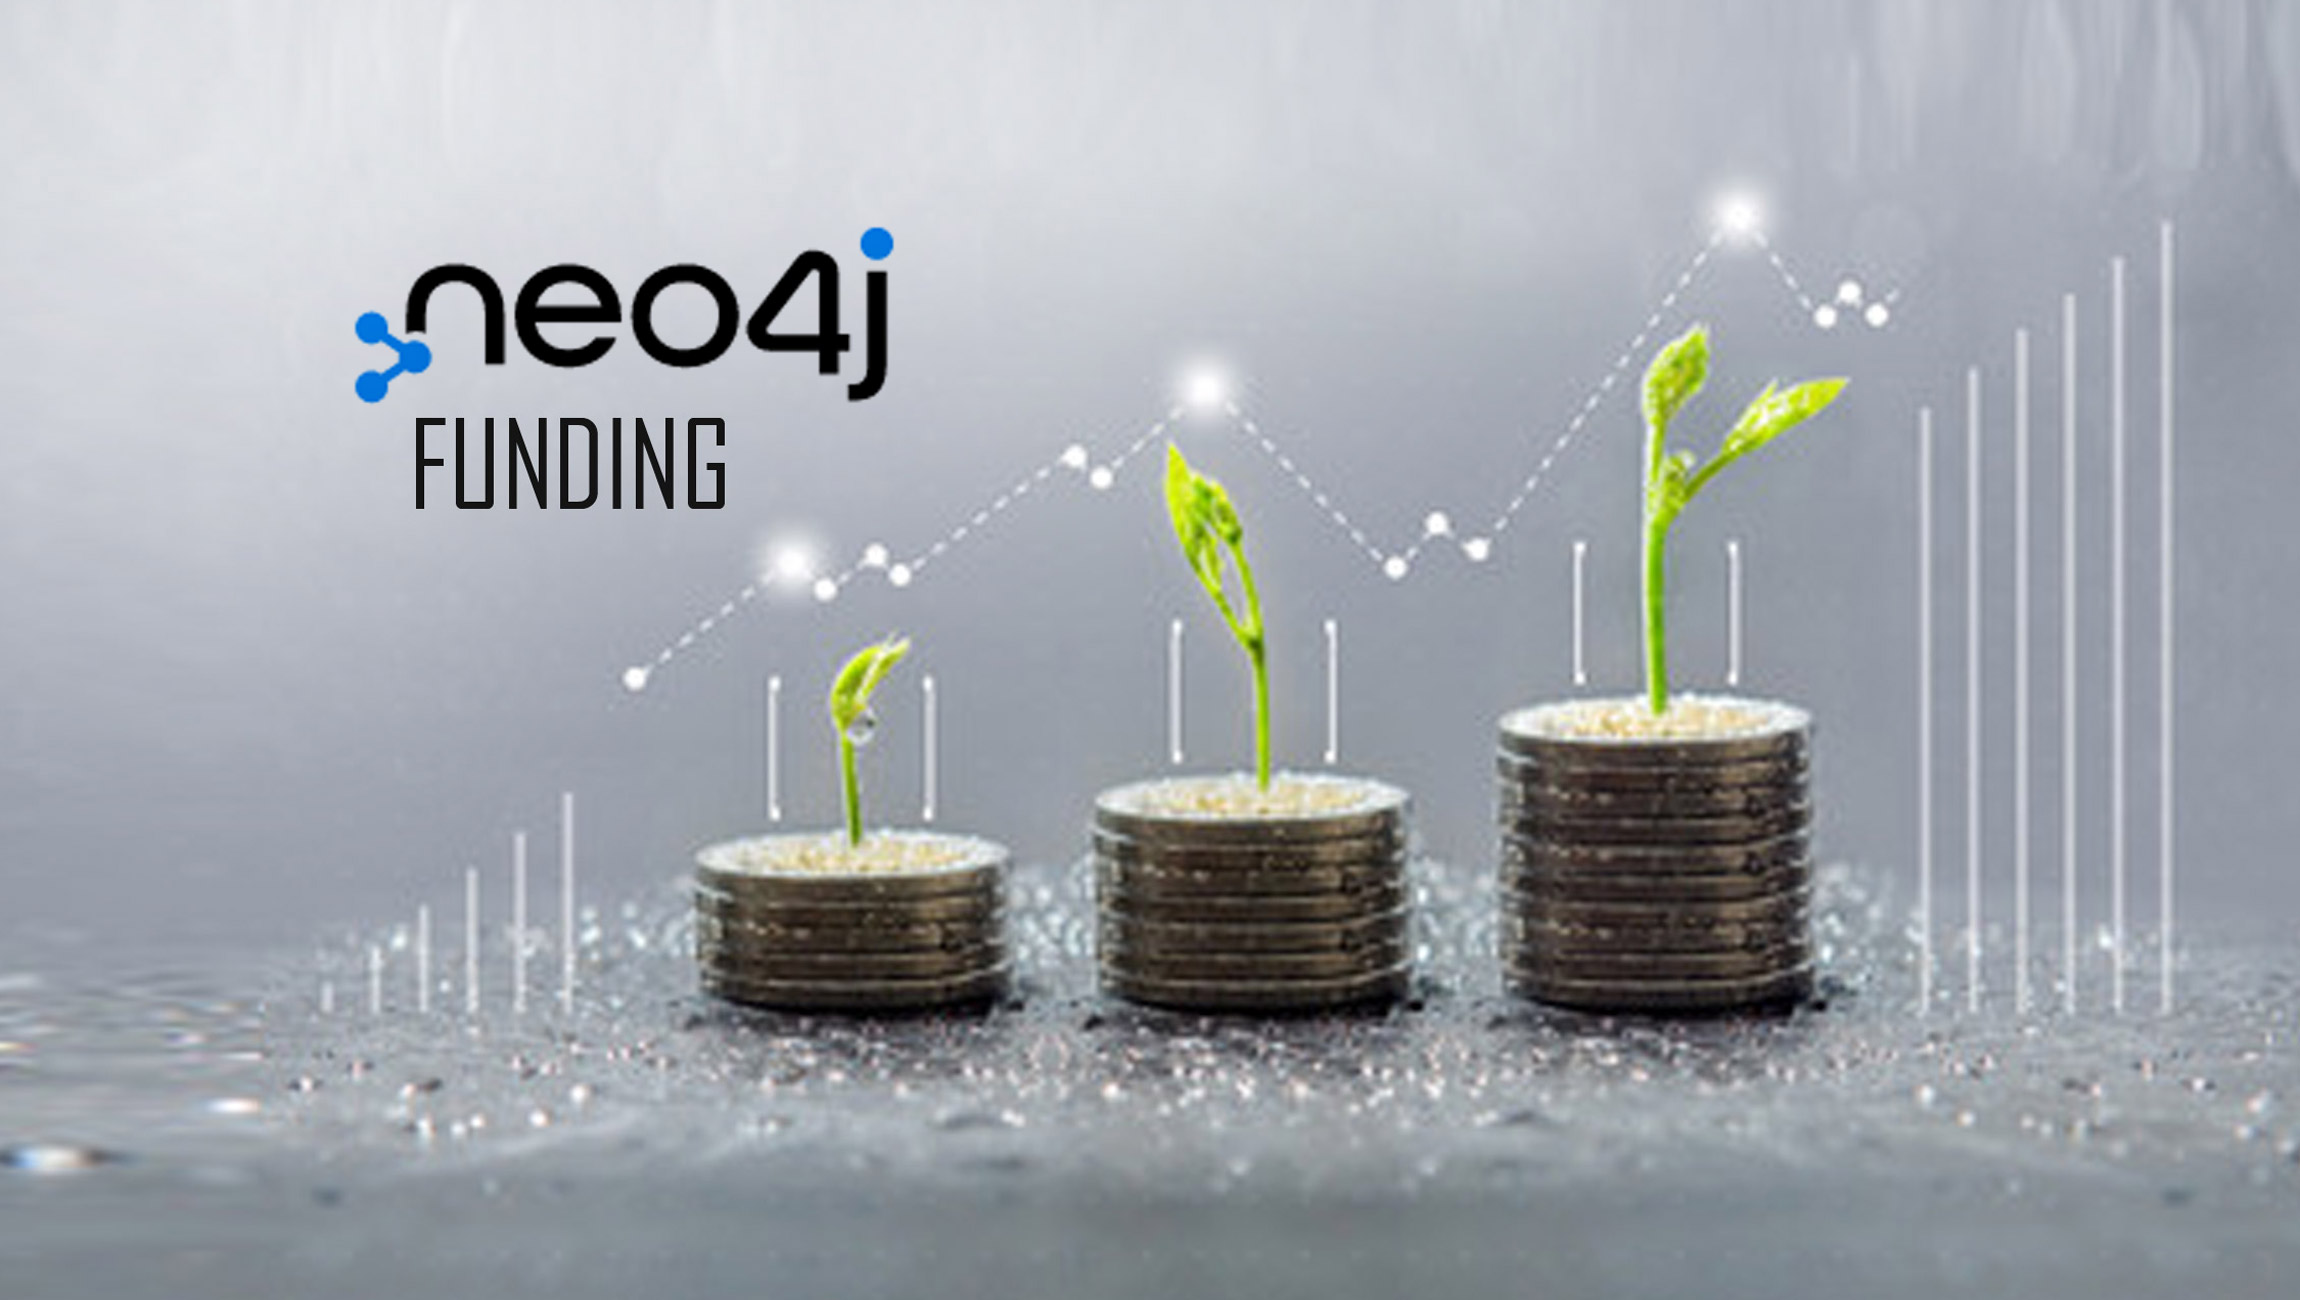 Neo4j-Announces-_325-Million-Series-F-Investment_-the-Largest-in-Database-History